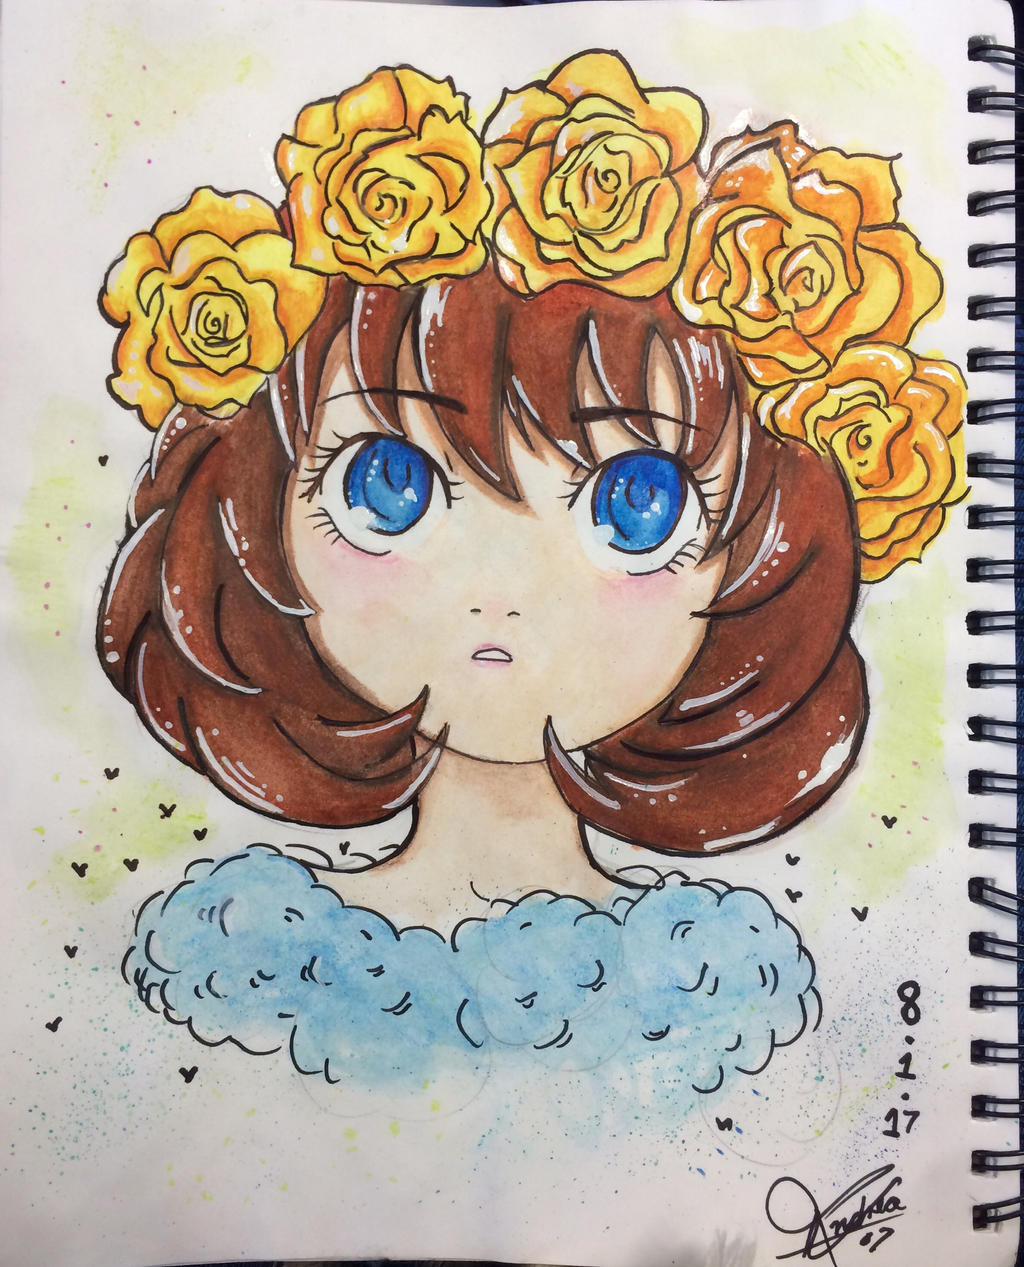 Watercolor anime girl by paoescritora on DeviantArt